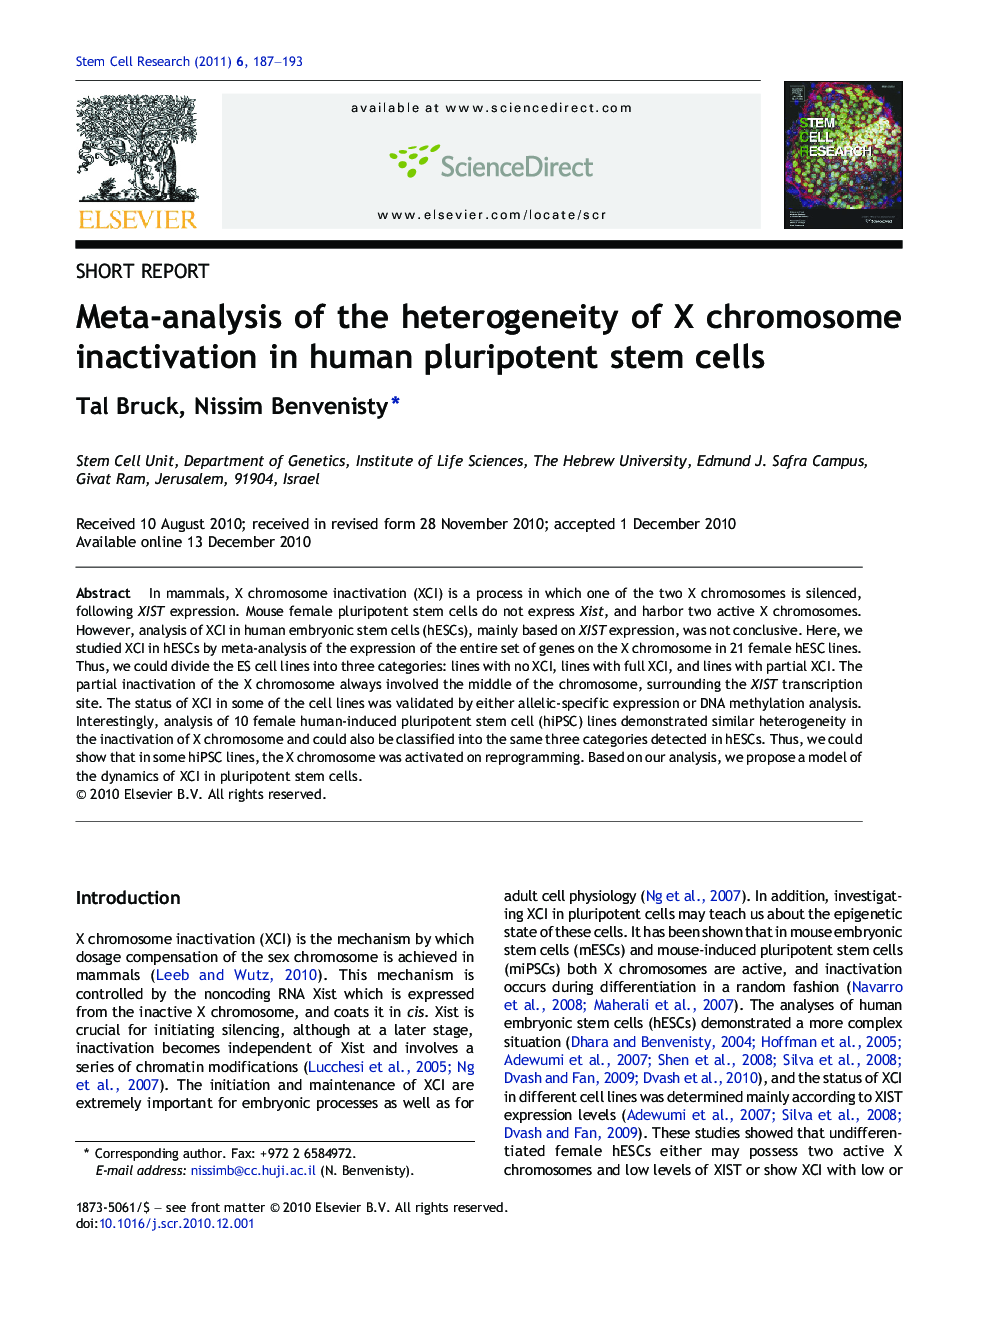 Meta-analysis of the heterogeneity of X chromosome inactivation in human pluripotent stem cells